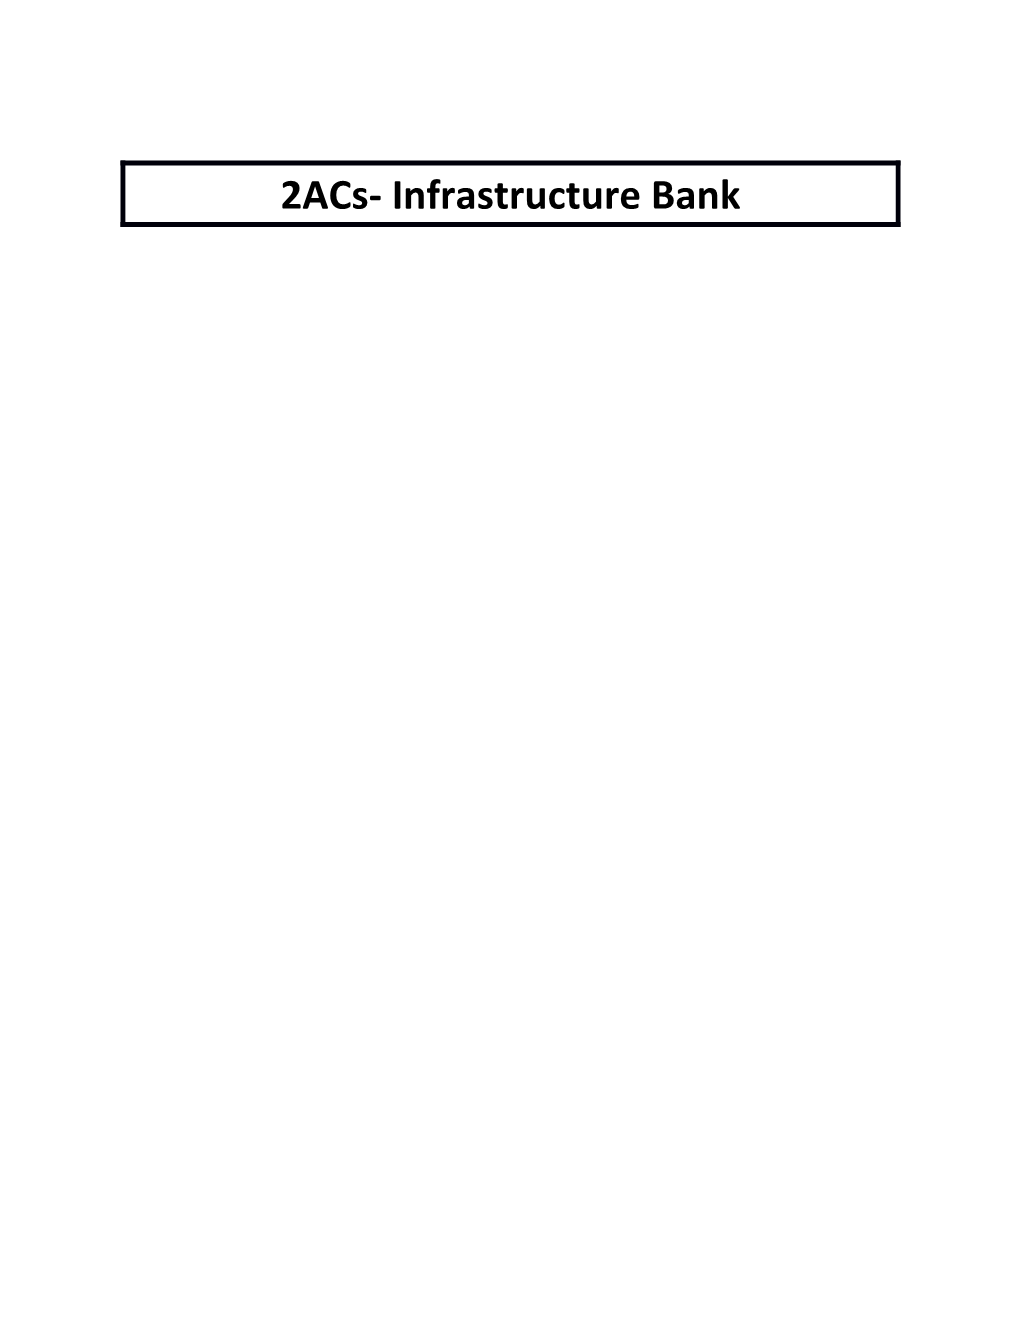 2Acs- Infrastructure Bank